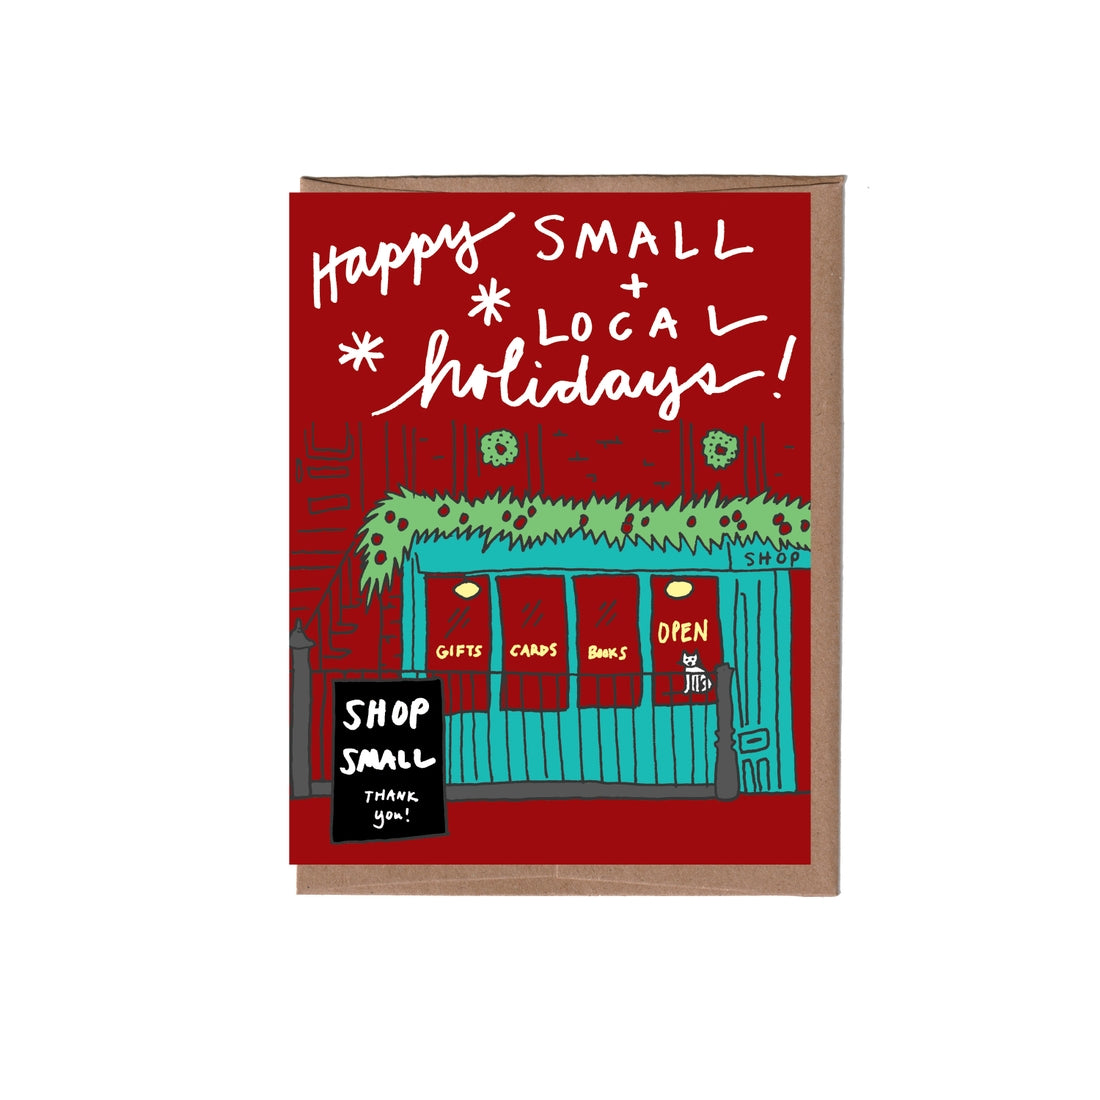 Small & Local Holiday Card